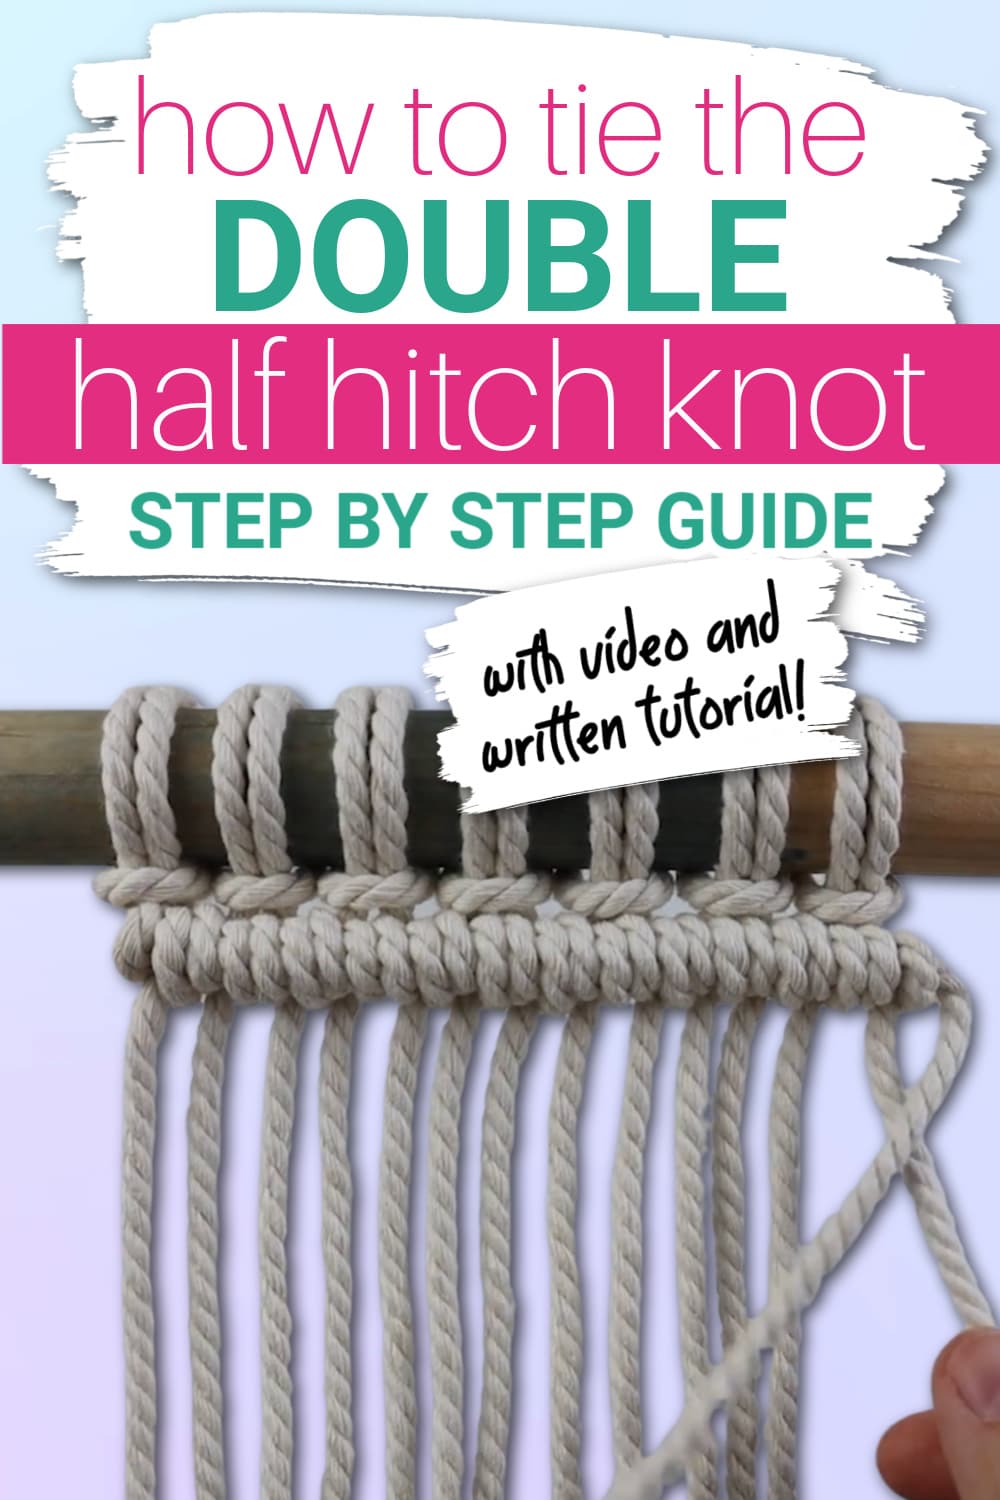 Hitch Knots  Learn How to Tie Hitches using Step-by-Step